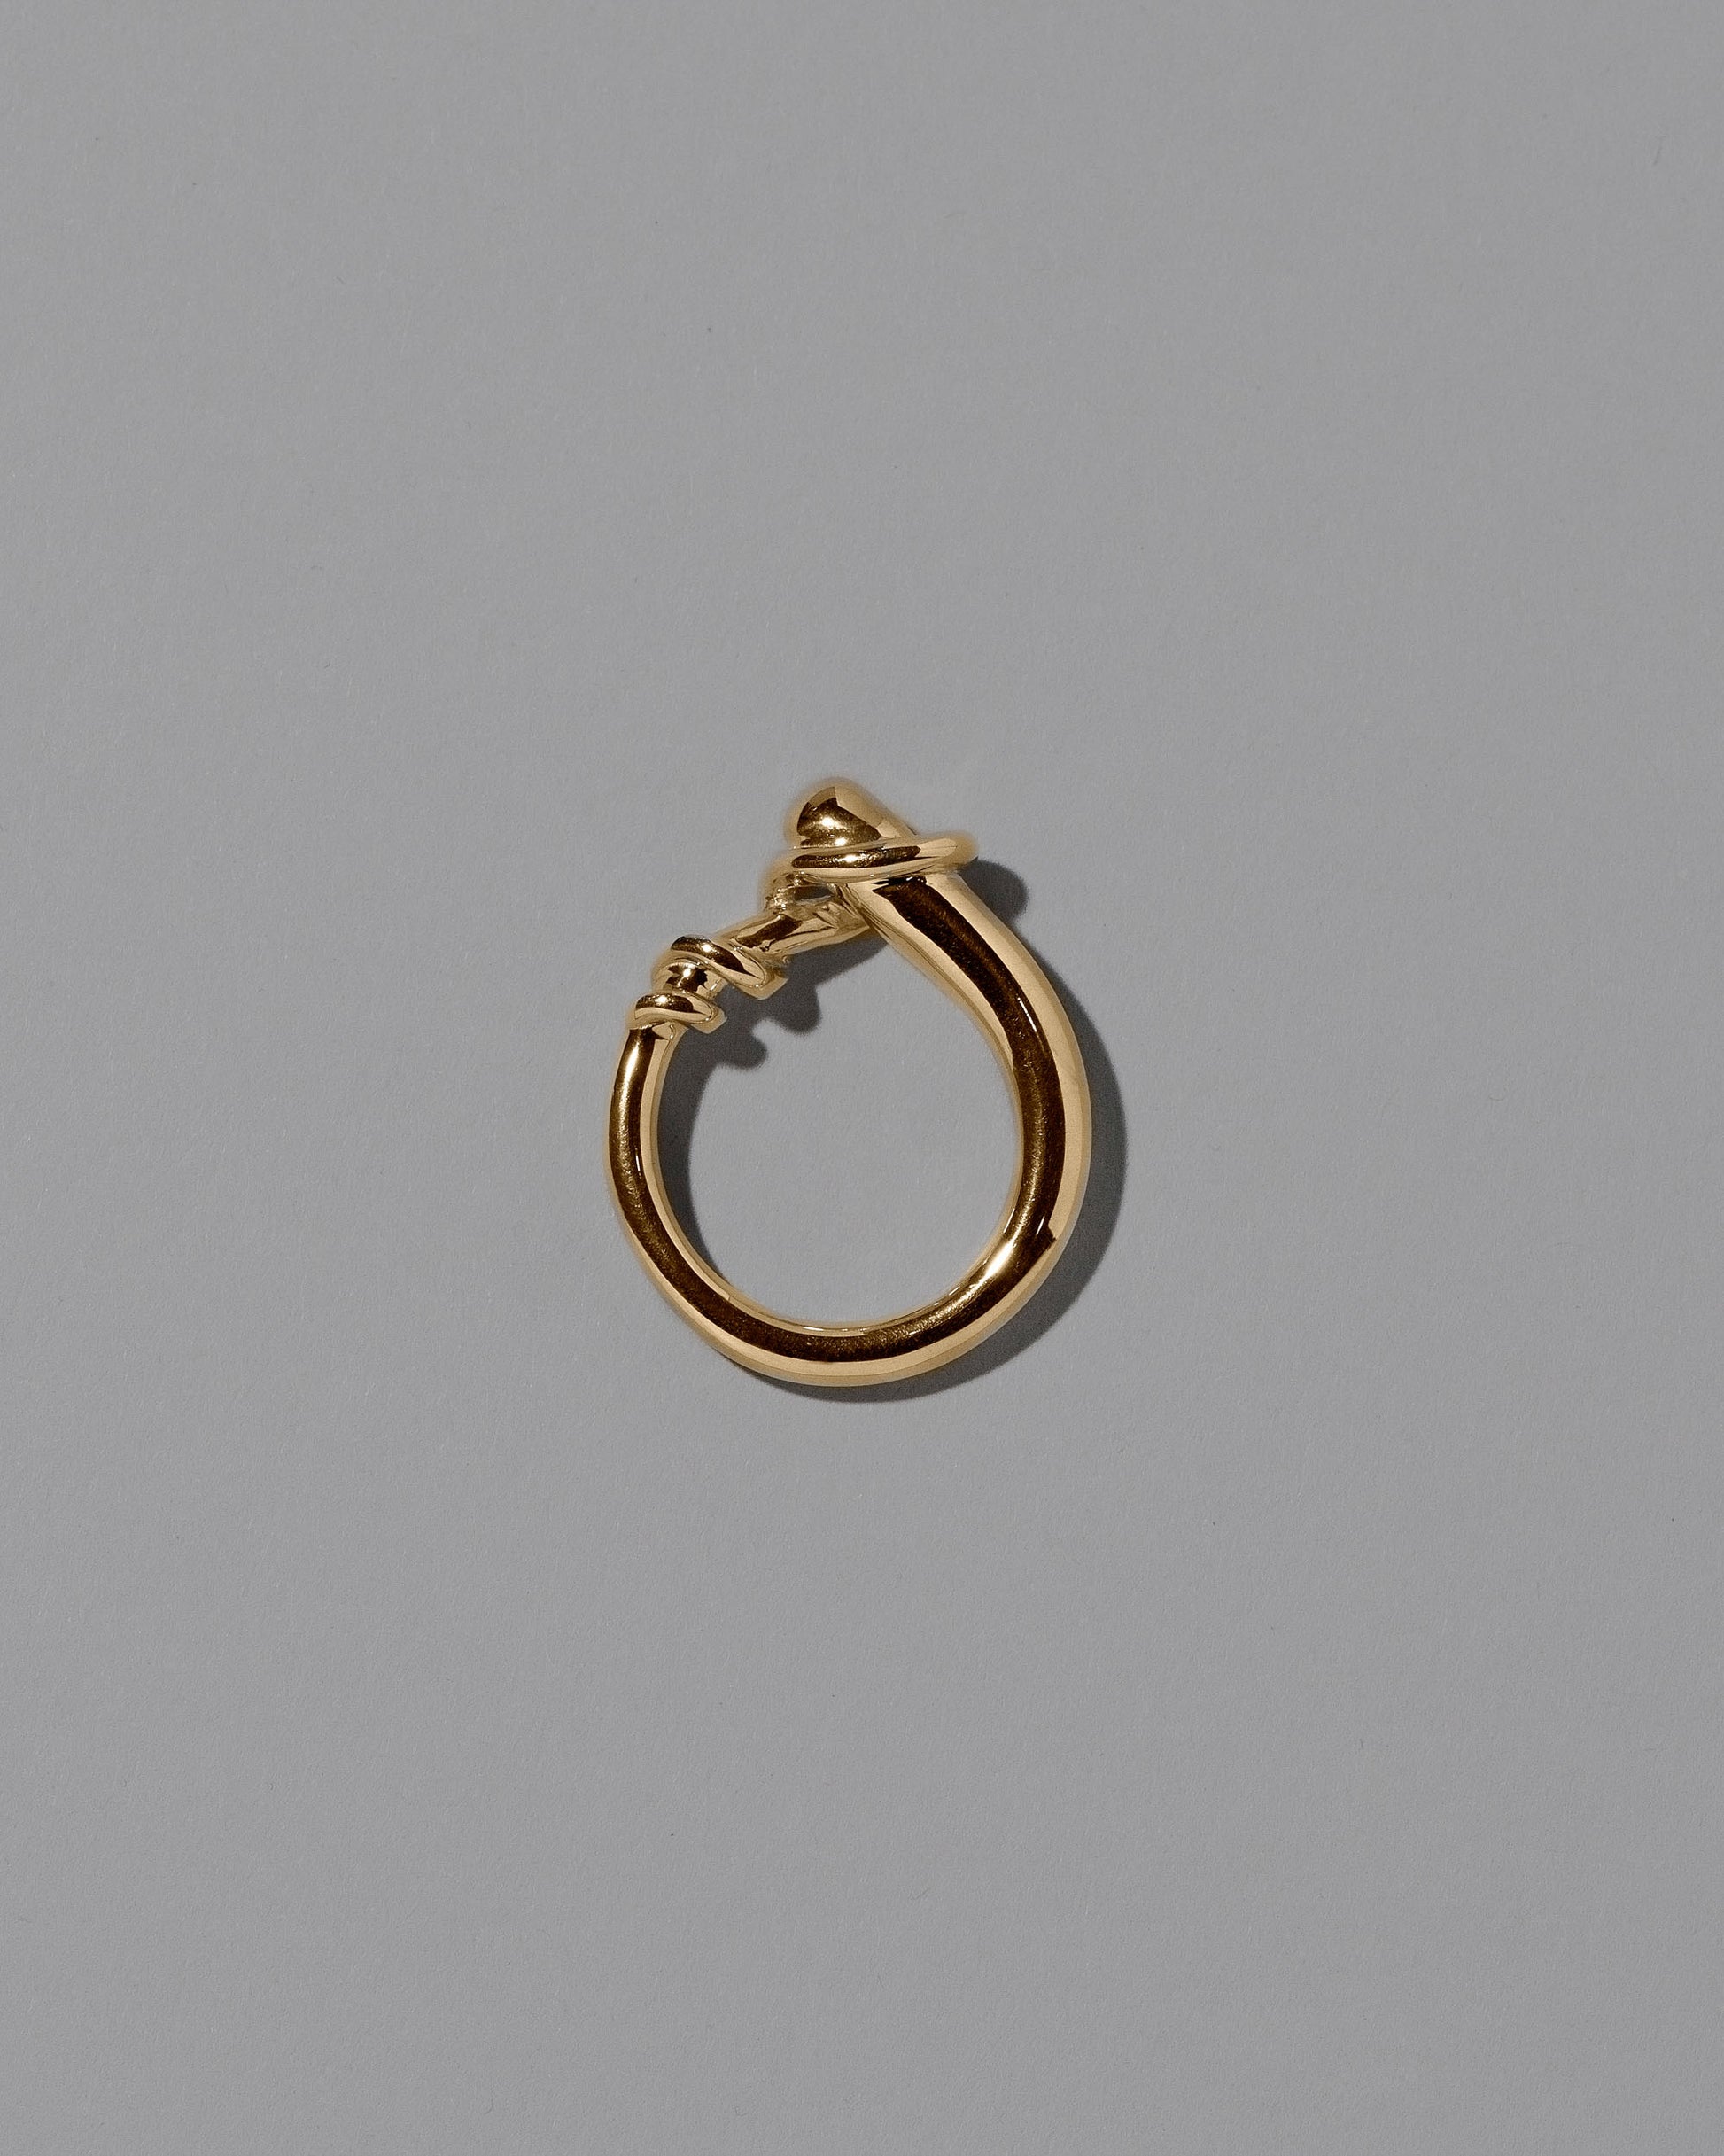 View from the side the of the CRZM 22k Gold Terrane Ring on light color background.